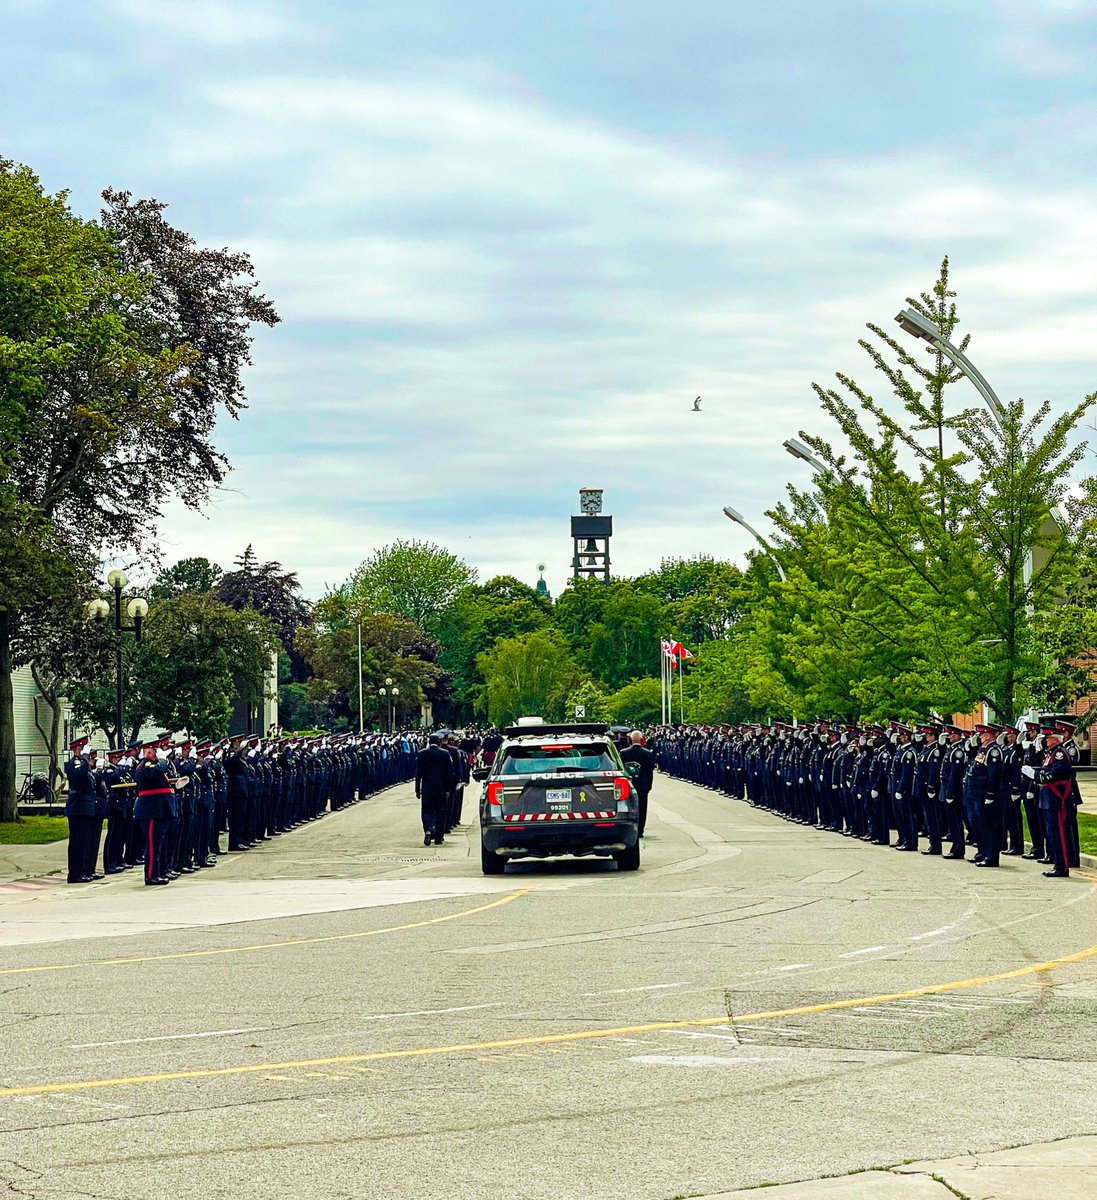 The final salute. Members of 52 Division Toronto Police salute the hearse carrying Cst. Jeffrey Northrup, as he heads towards his final resting place. We continue to keep his family, friends and colleagues in our thoughts and prayers.